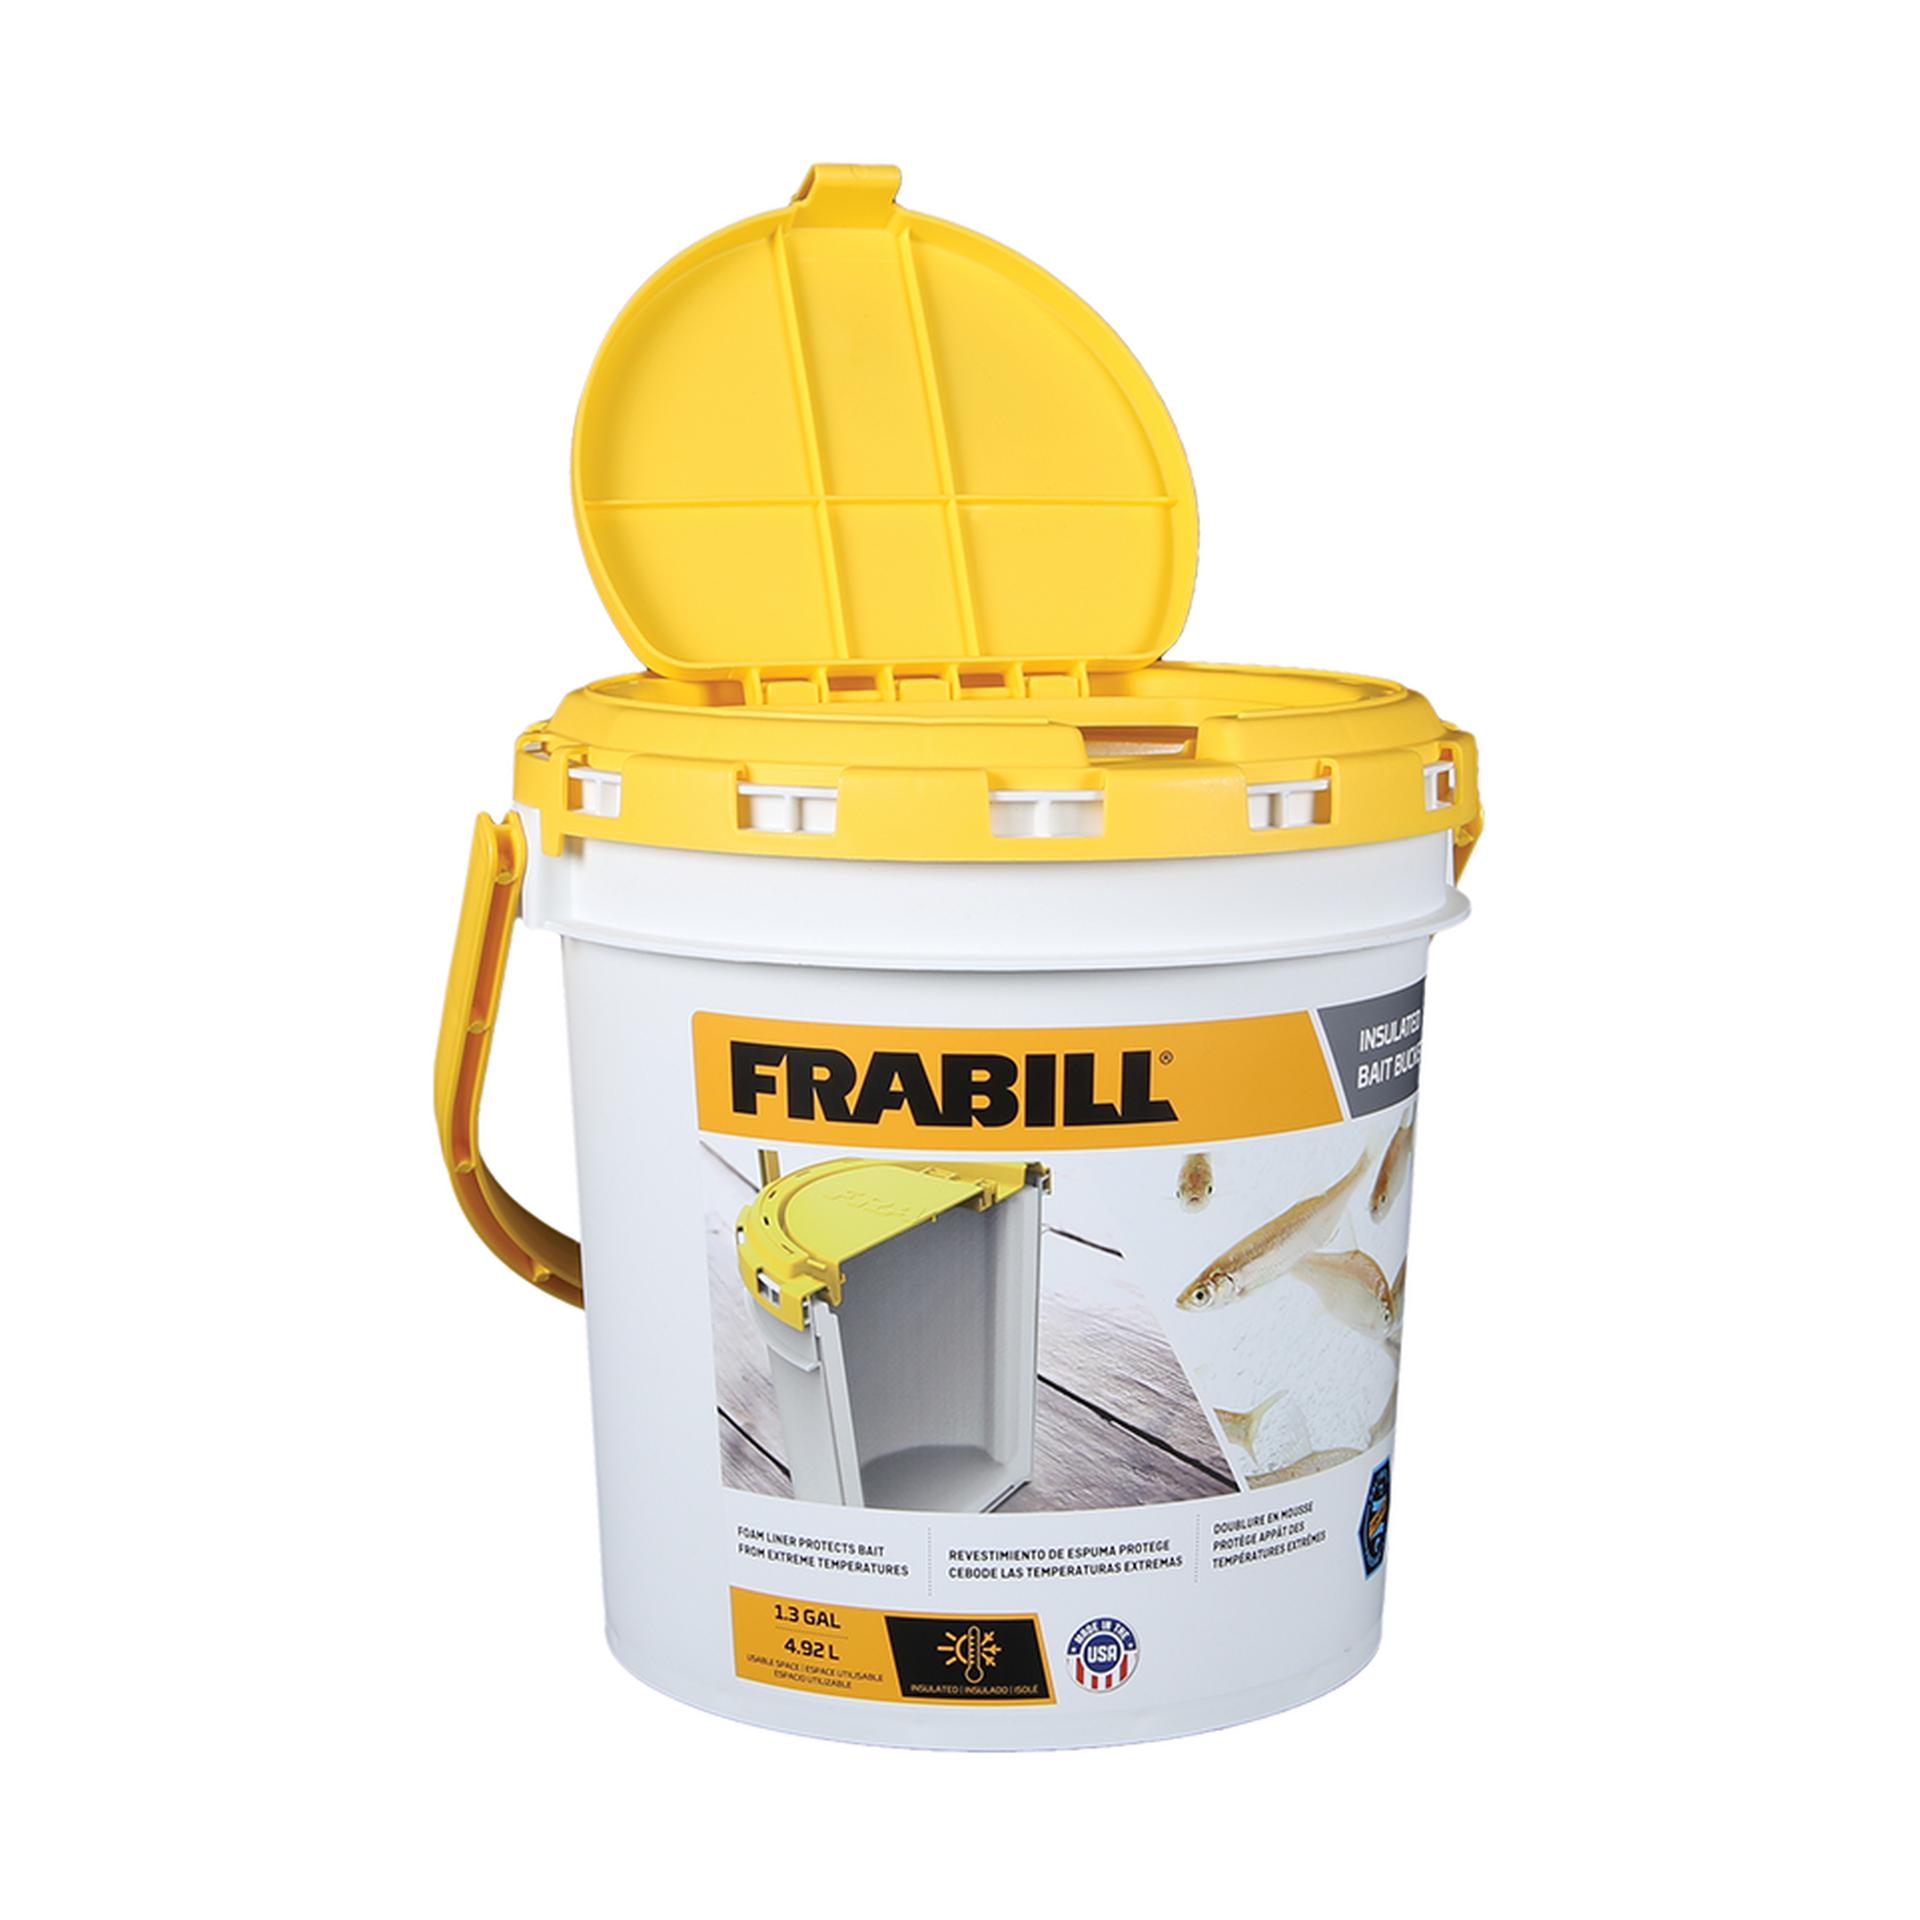 Smaller Frabill Bait Buckets Great For Bank Anglers - Georgia Outdoor News